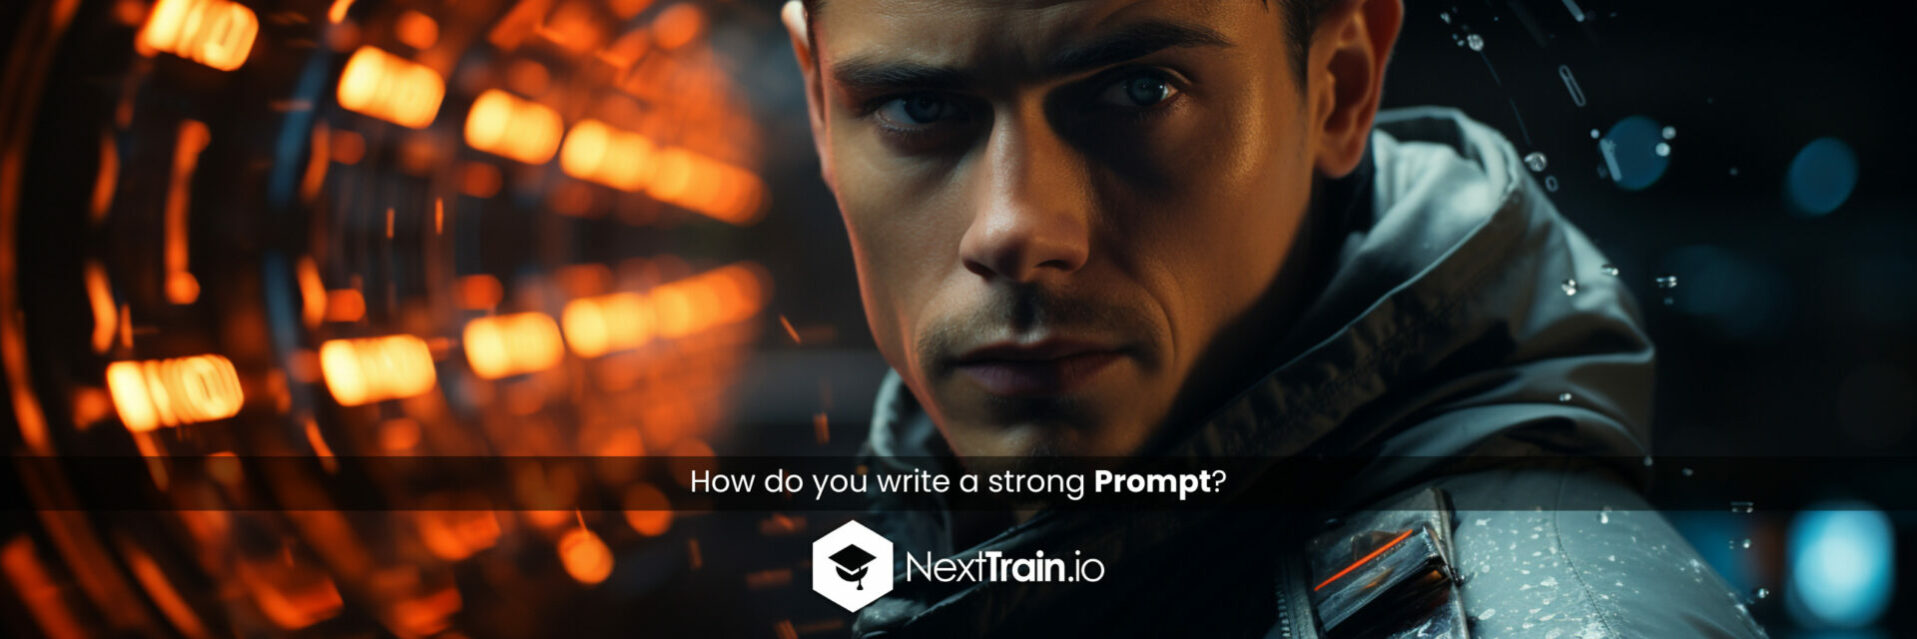 How do you write a strong Prompt?